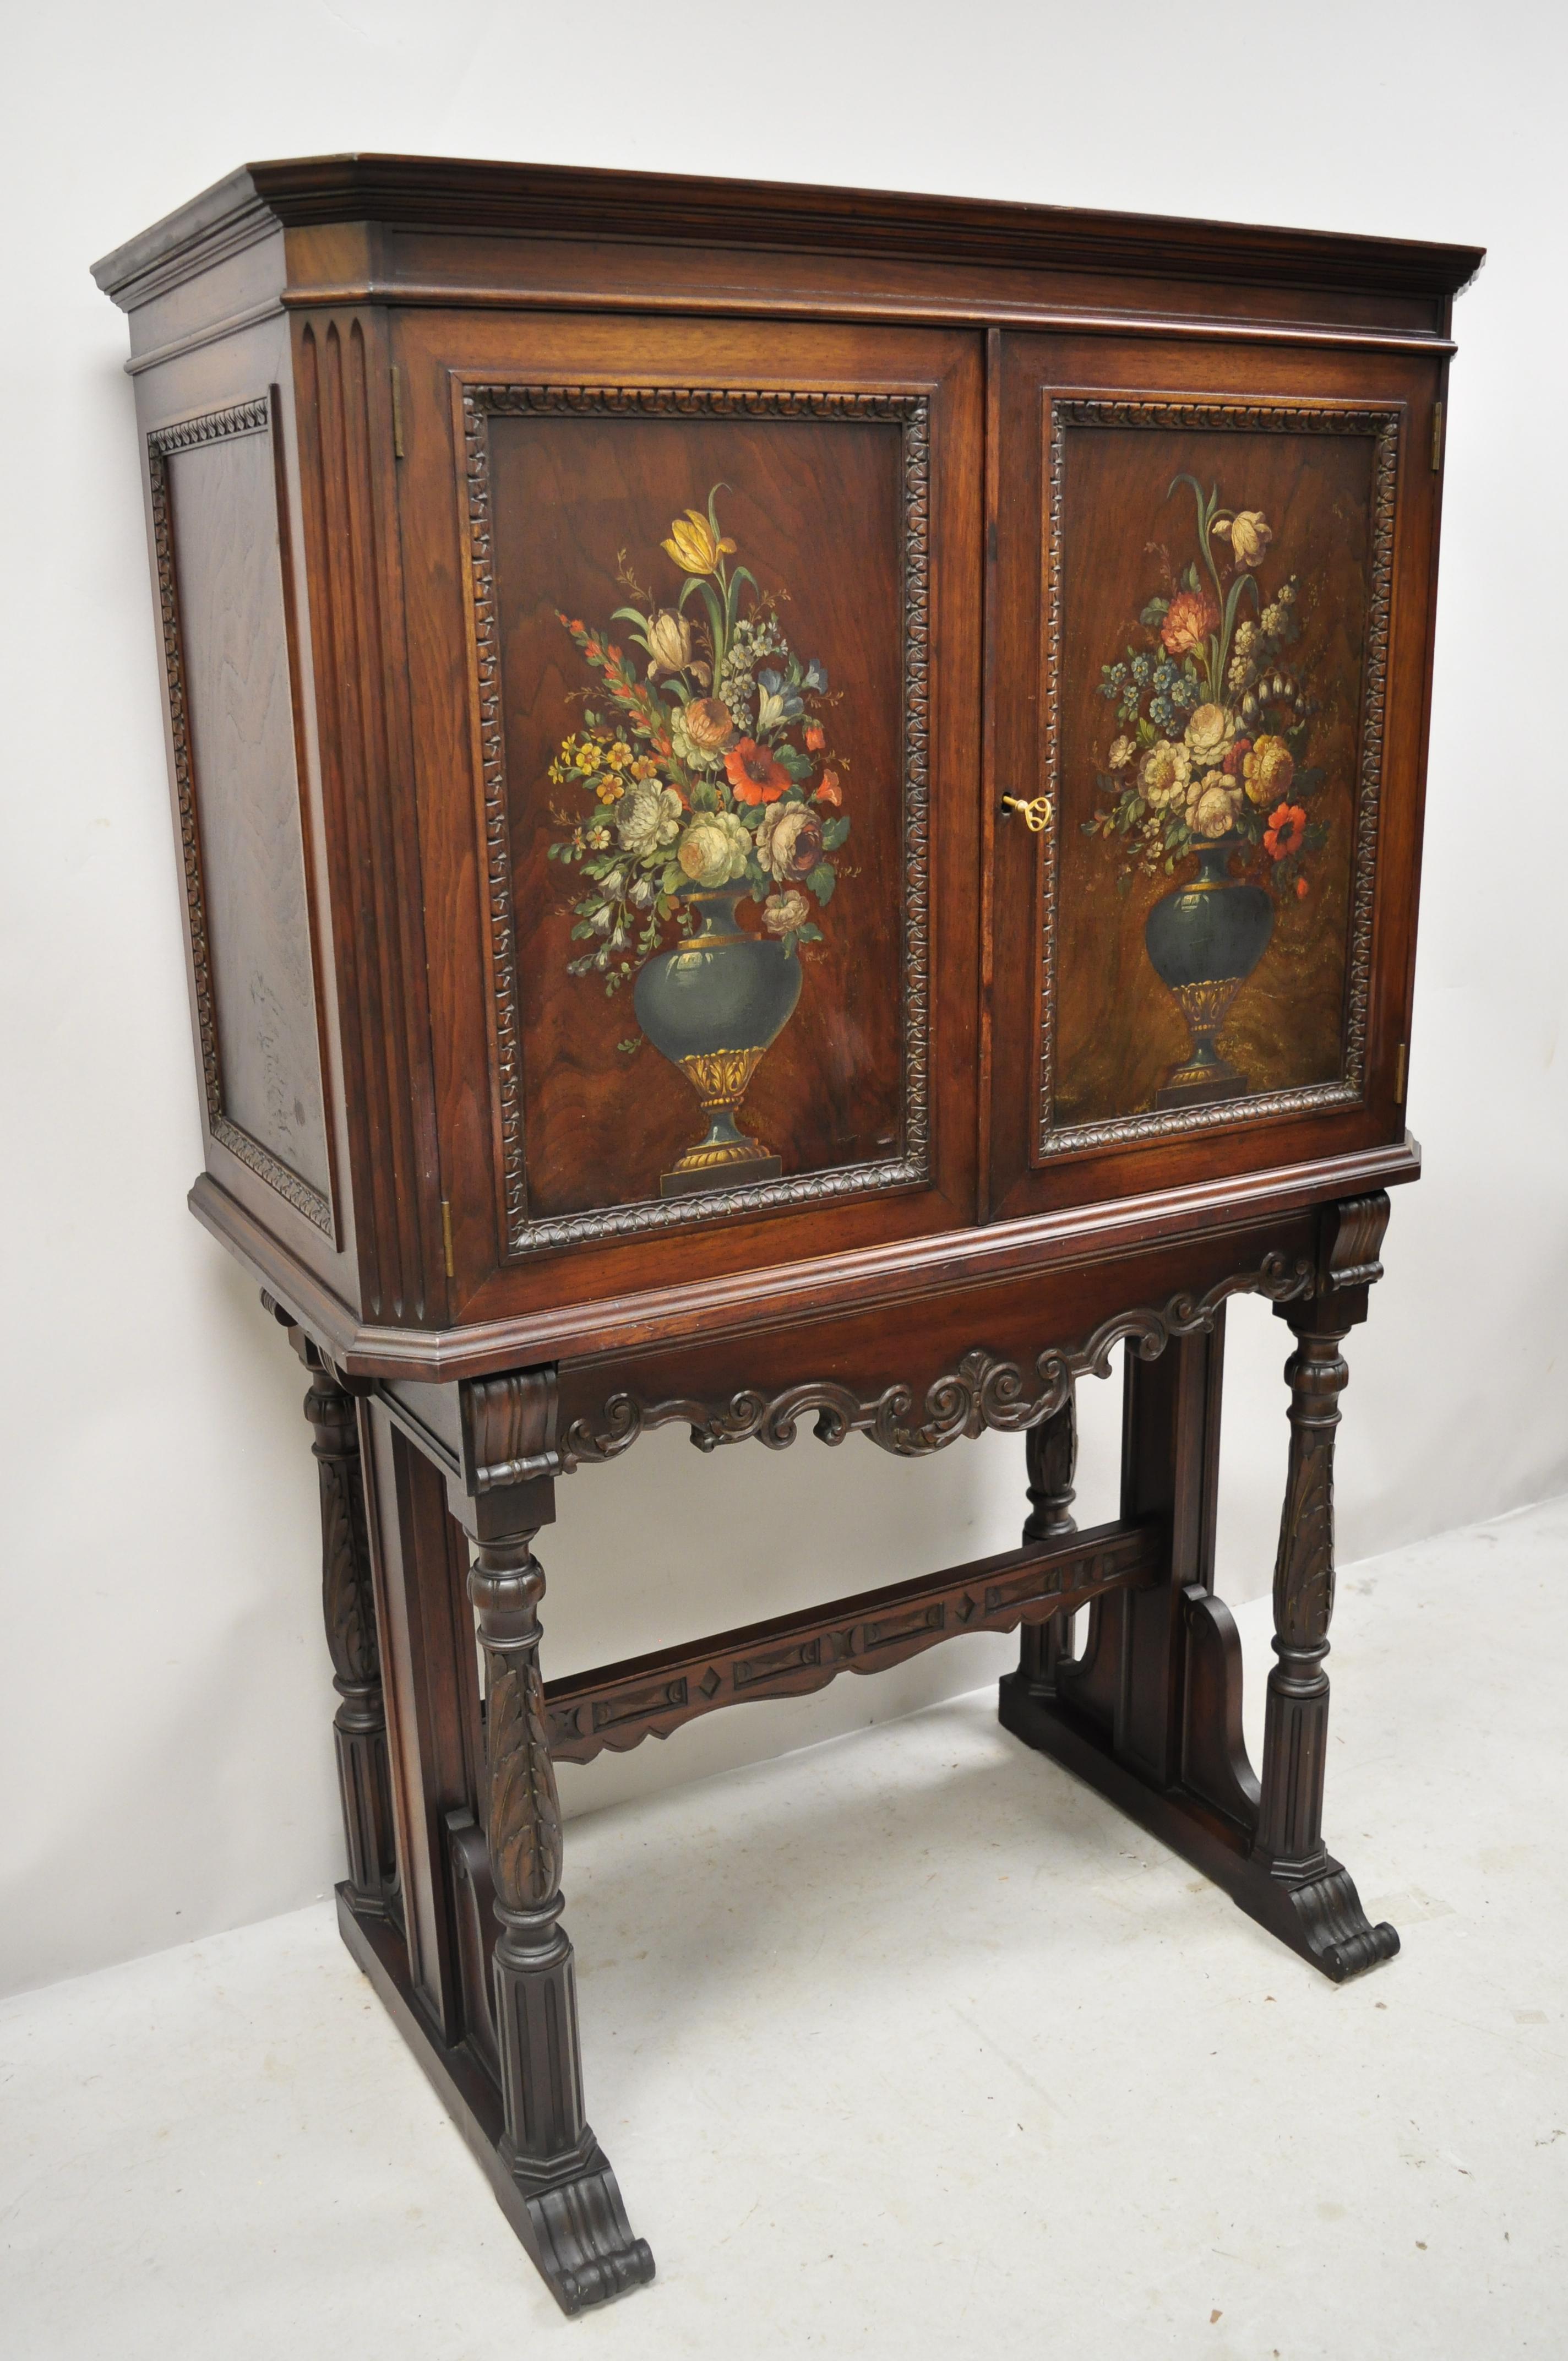 Antique Jacobean floral hand painted carved walnut blind door cupboard cabinet. Item features hand painted flower arrangements to door fronts, pull out tray surface, beautiful wood grain, nicely carved details, 2 swing doors, working lock and key,